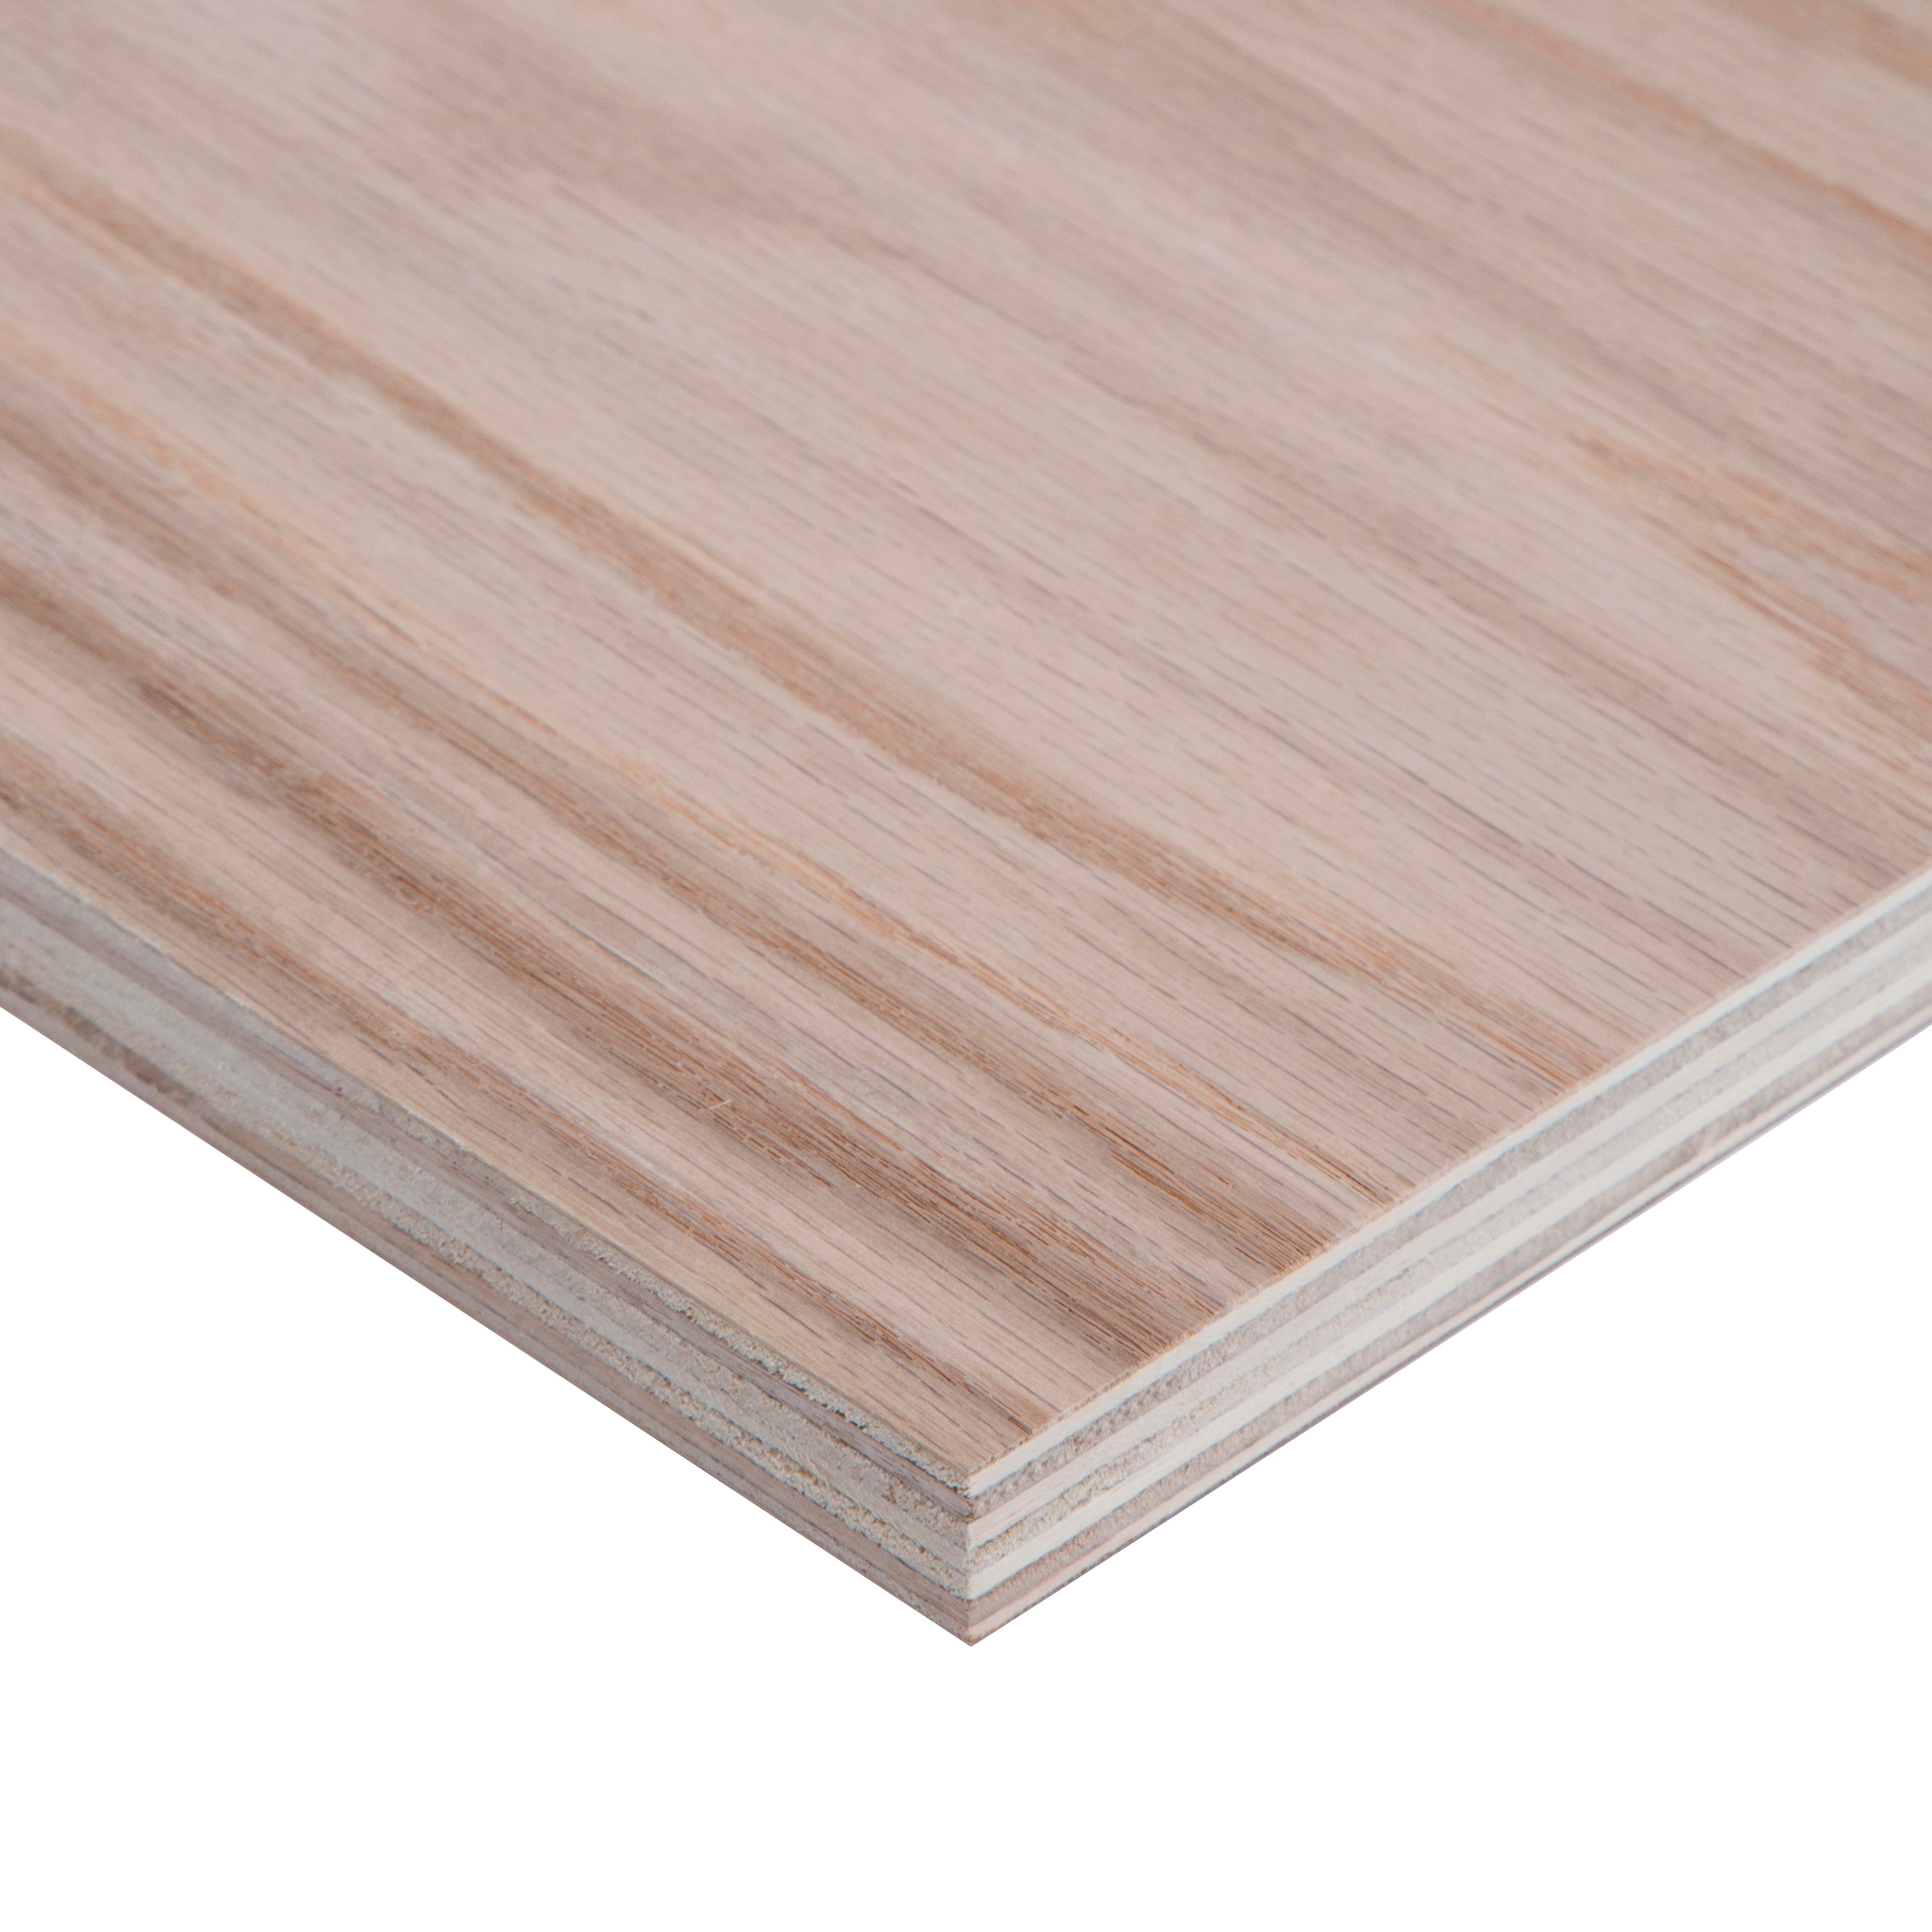 Wholesale 4×8 3/4 Inch Red Oak Plywood Fancy Ply Wood Sheets Manufacturers  and Factory